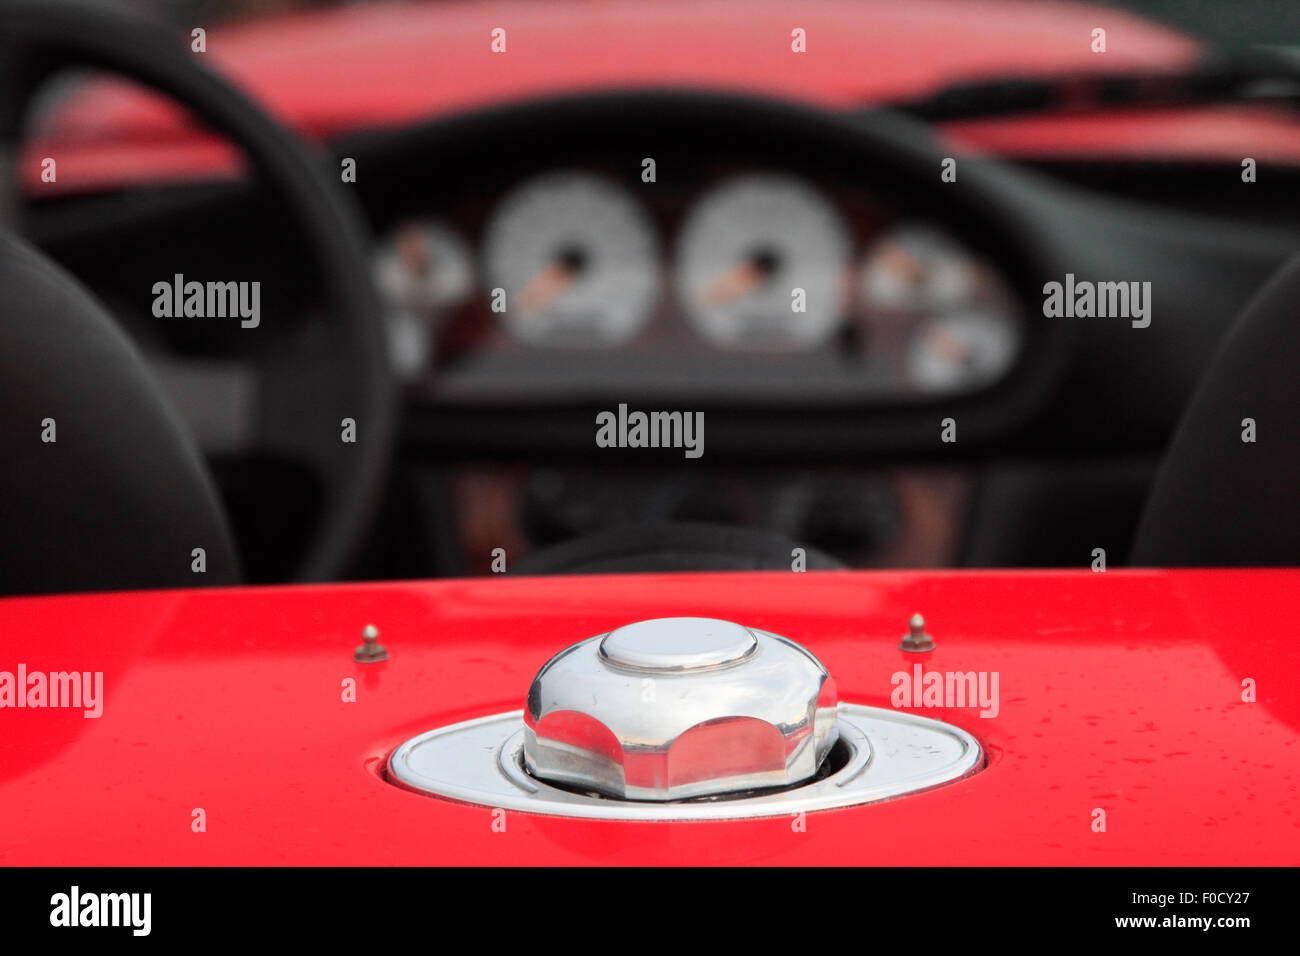 Close up of a cabriolet car with a focus on the fuel cap. Stock Photo